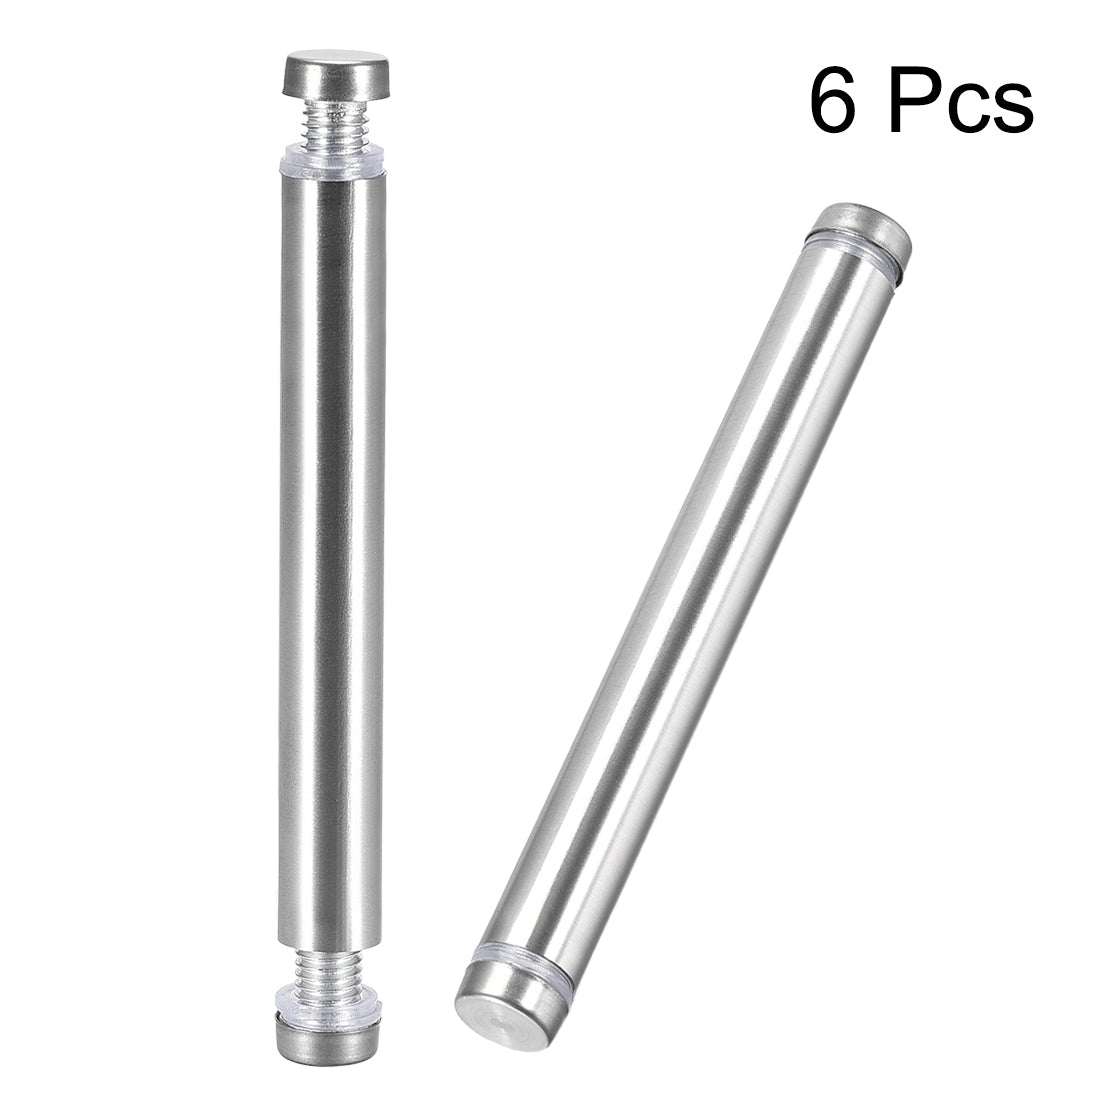 uxcell Uxcell Glass Standoff Double Head Stainless Steel Standoff Holder 12mm x 104mm 6 Pcs